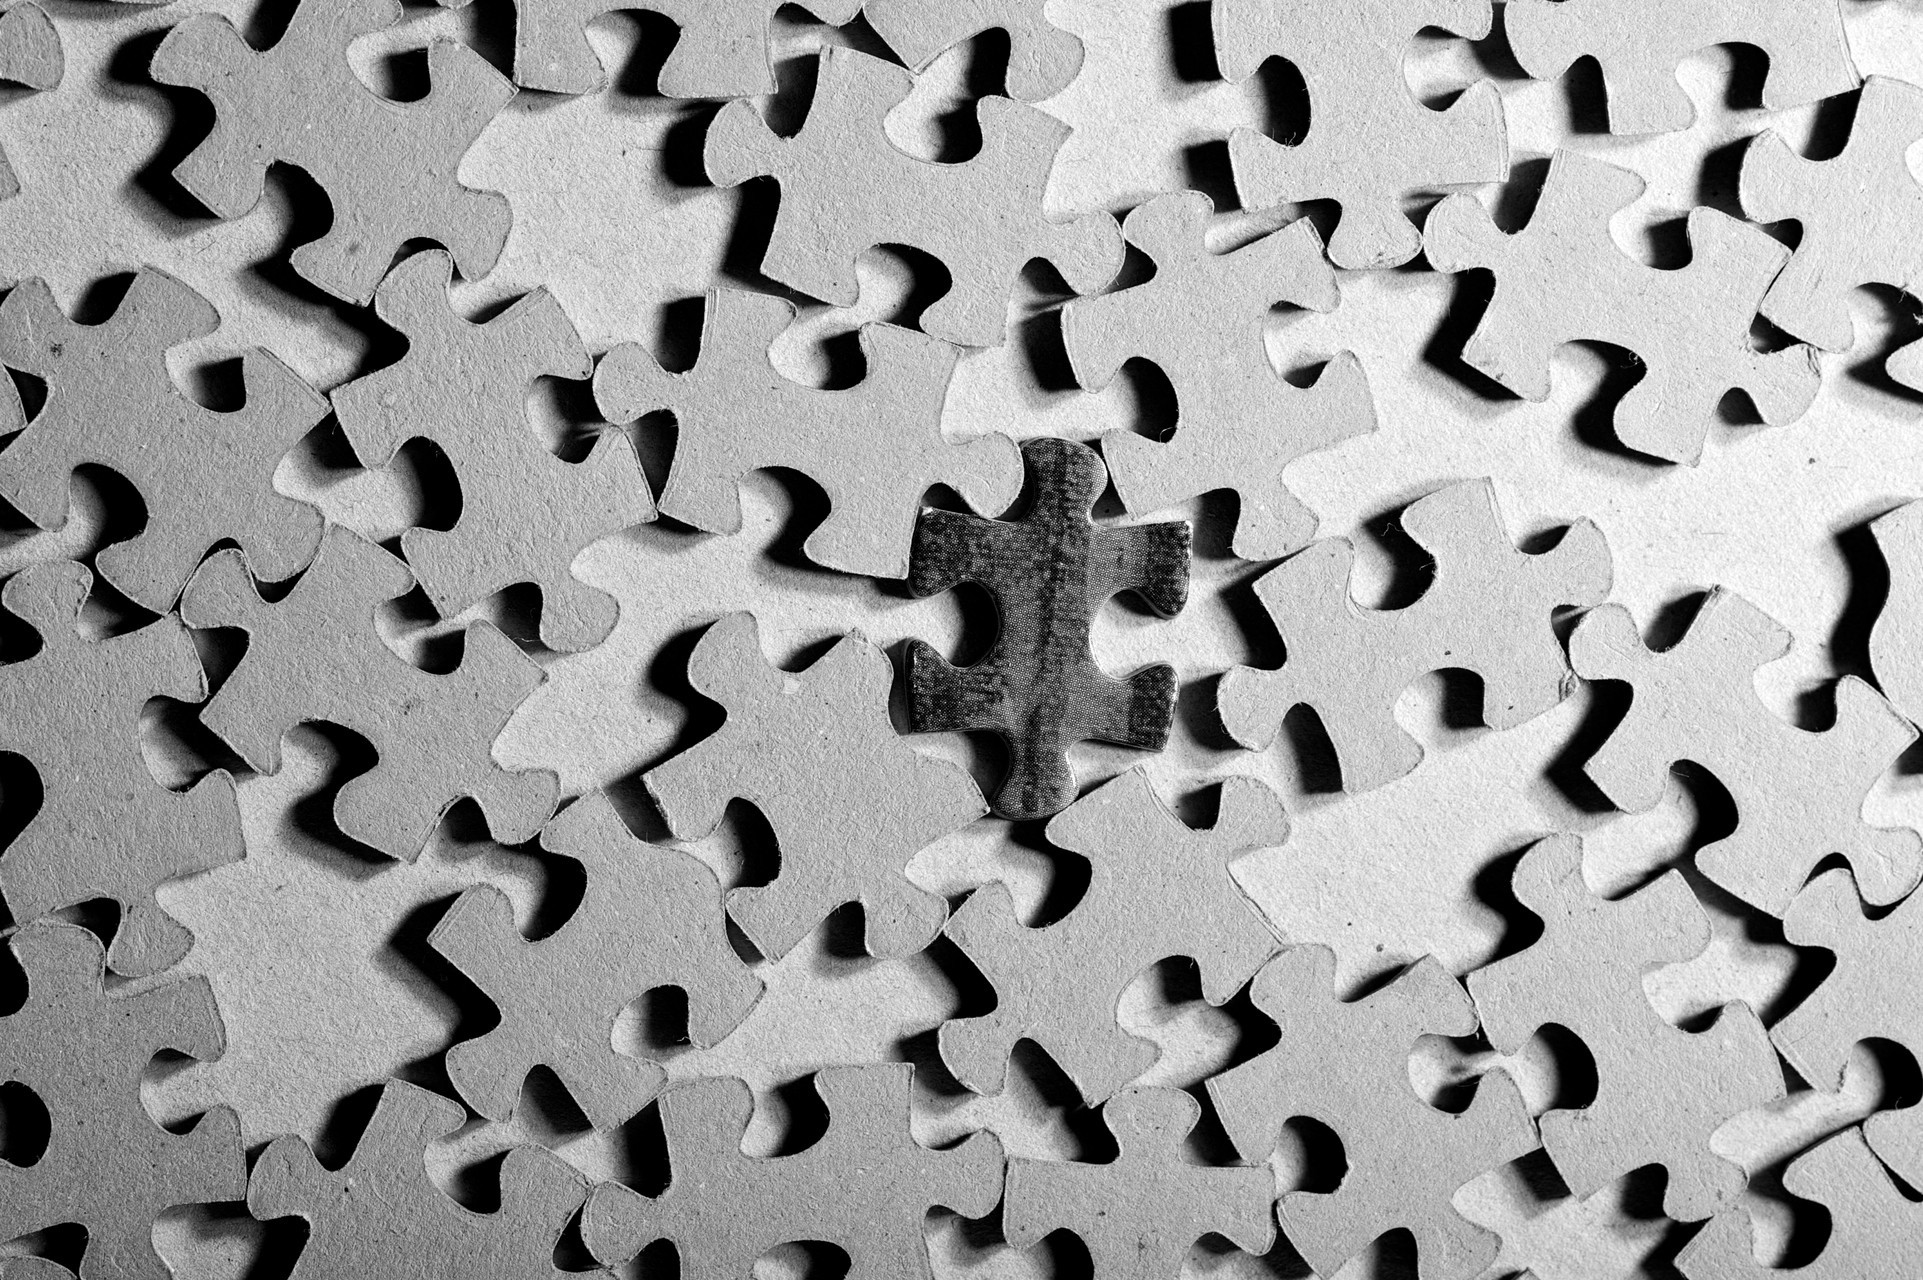 PC Wallpapers texture, miscellanea, miscellaneous, form, bw, chb, puzzle, jigsaw